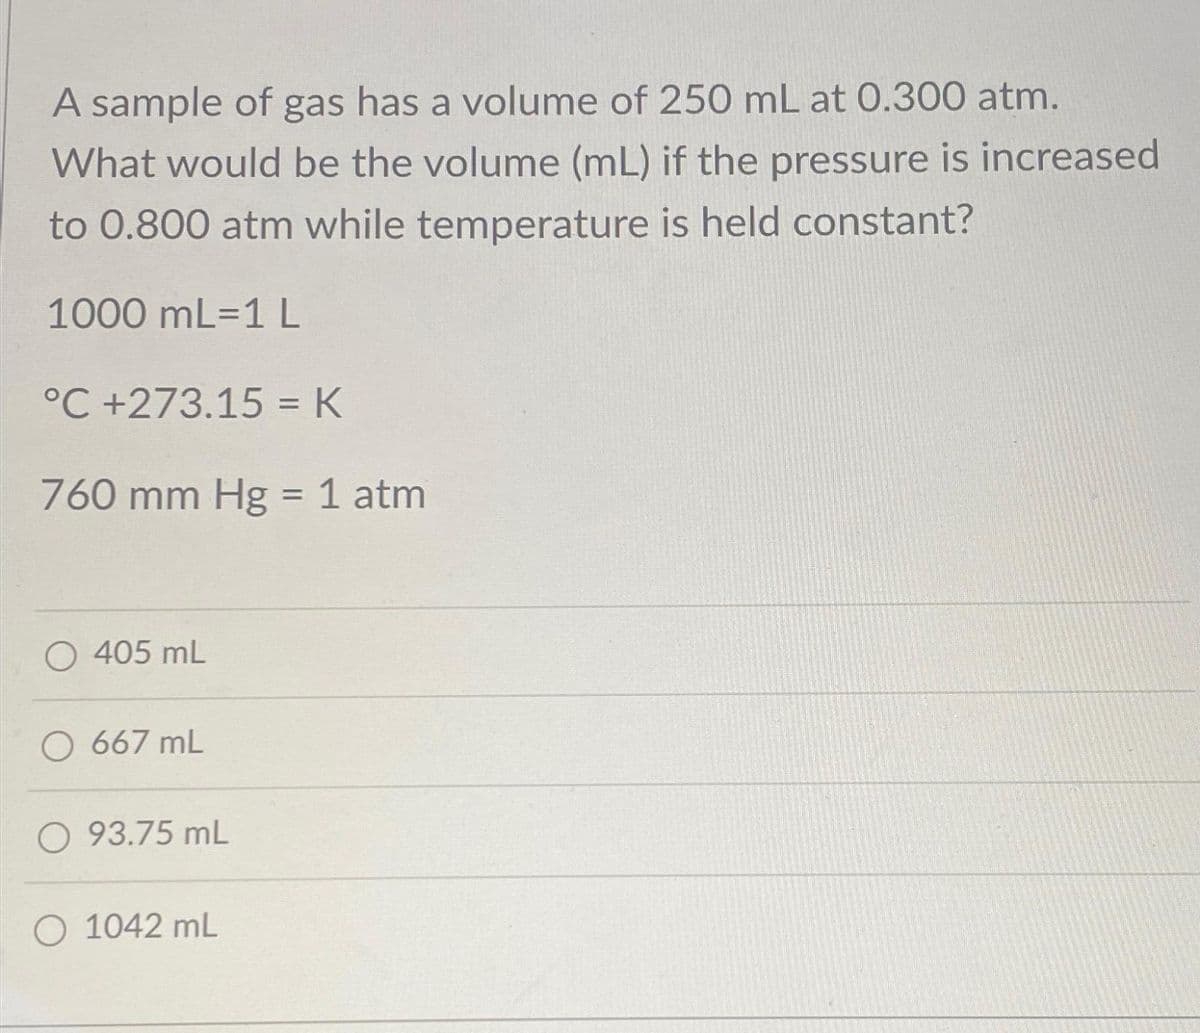 A sample of gas has a volume of 250 mL at 0.300 atm.
What would be the volume (mL) if the pressure is increased
to 0.800 atm while temperature is held constant?
1000 mL-1 L
°C +273.15 = K
760 mm Hg = 1 atm
O 405 mL
O 667 mL
O 93.75 mL
O 1042 mL